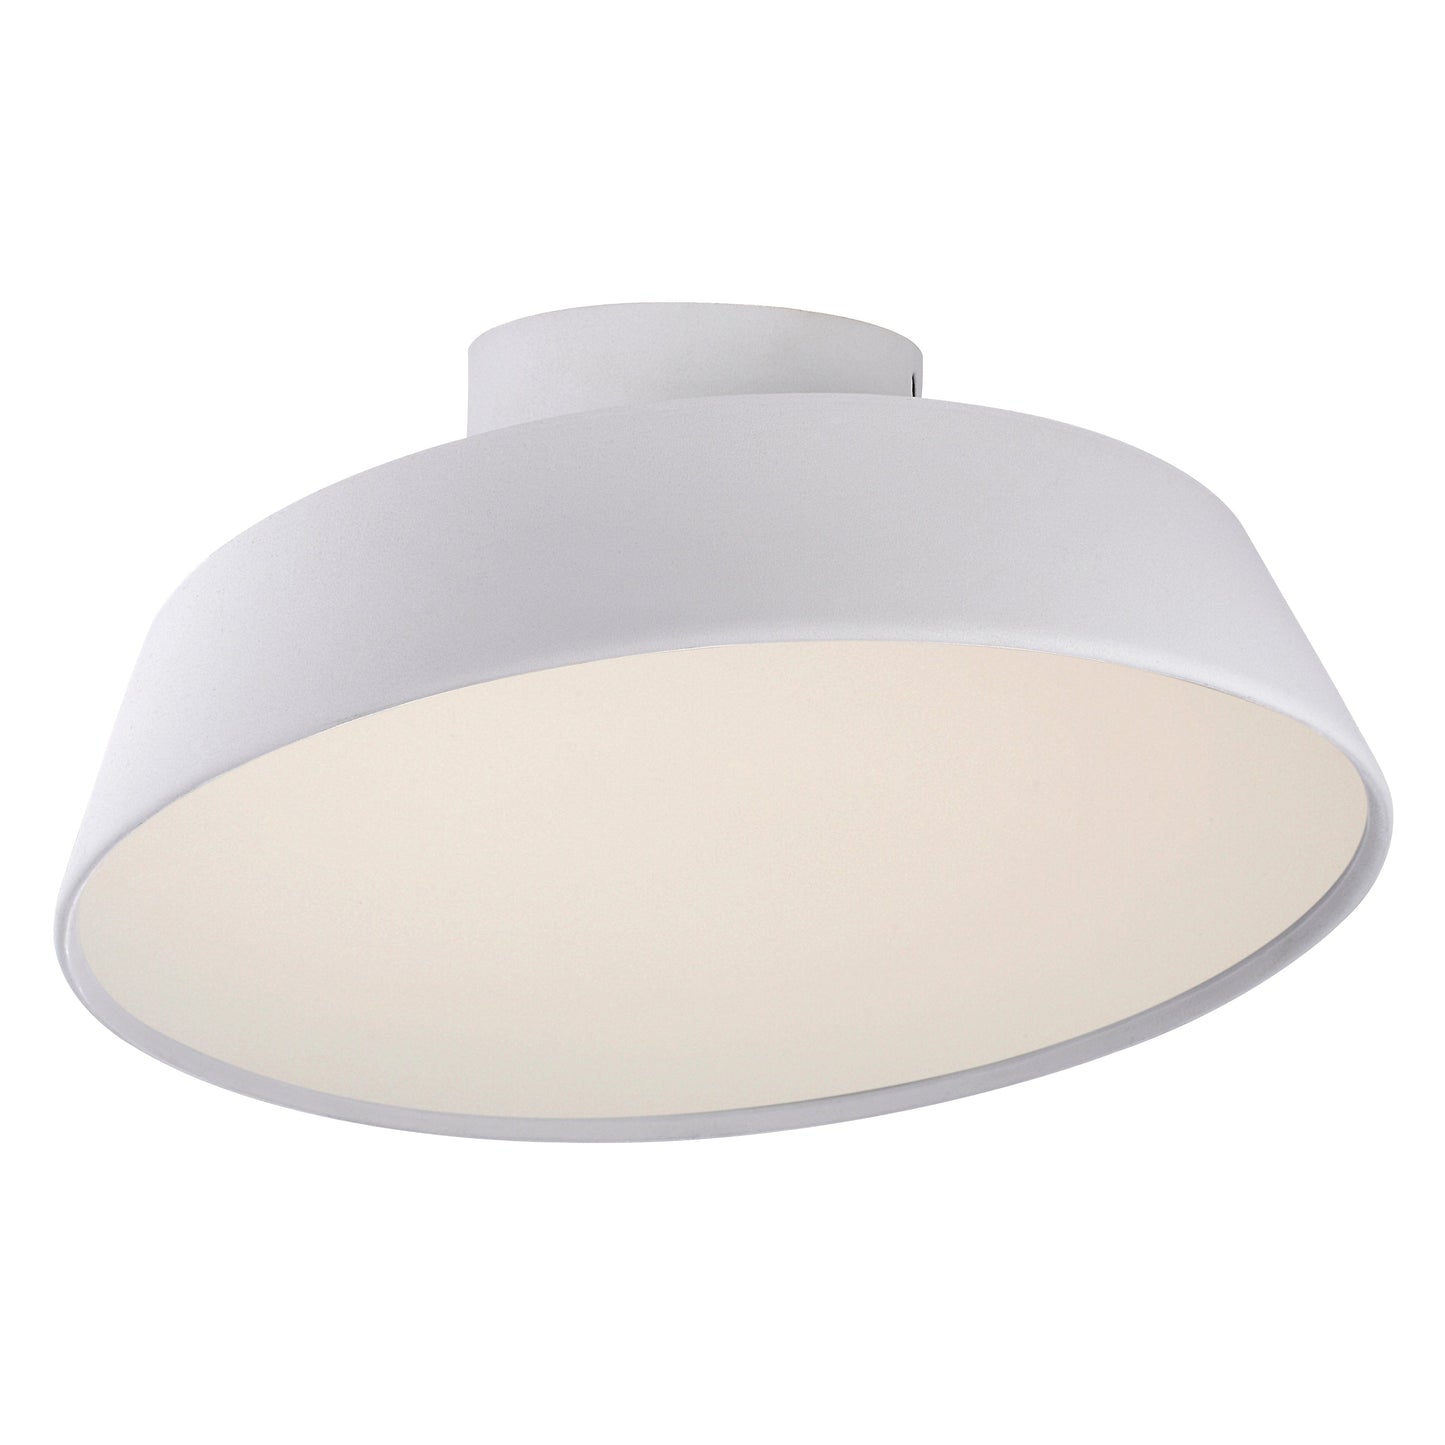 Nordlux - DFTP Ceiling light White Kaito Ceiling Light, dimmable